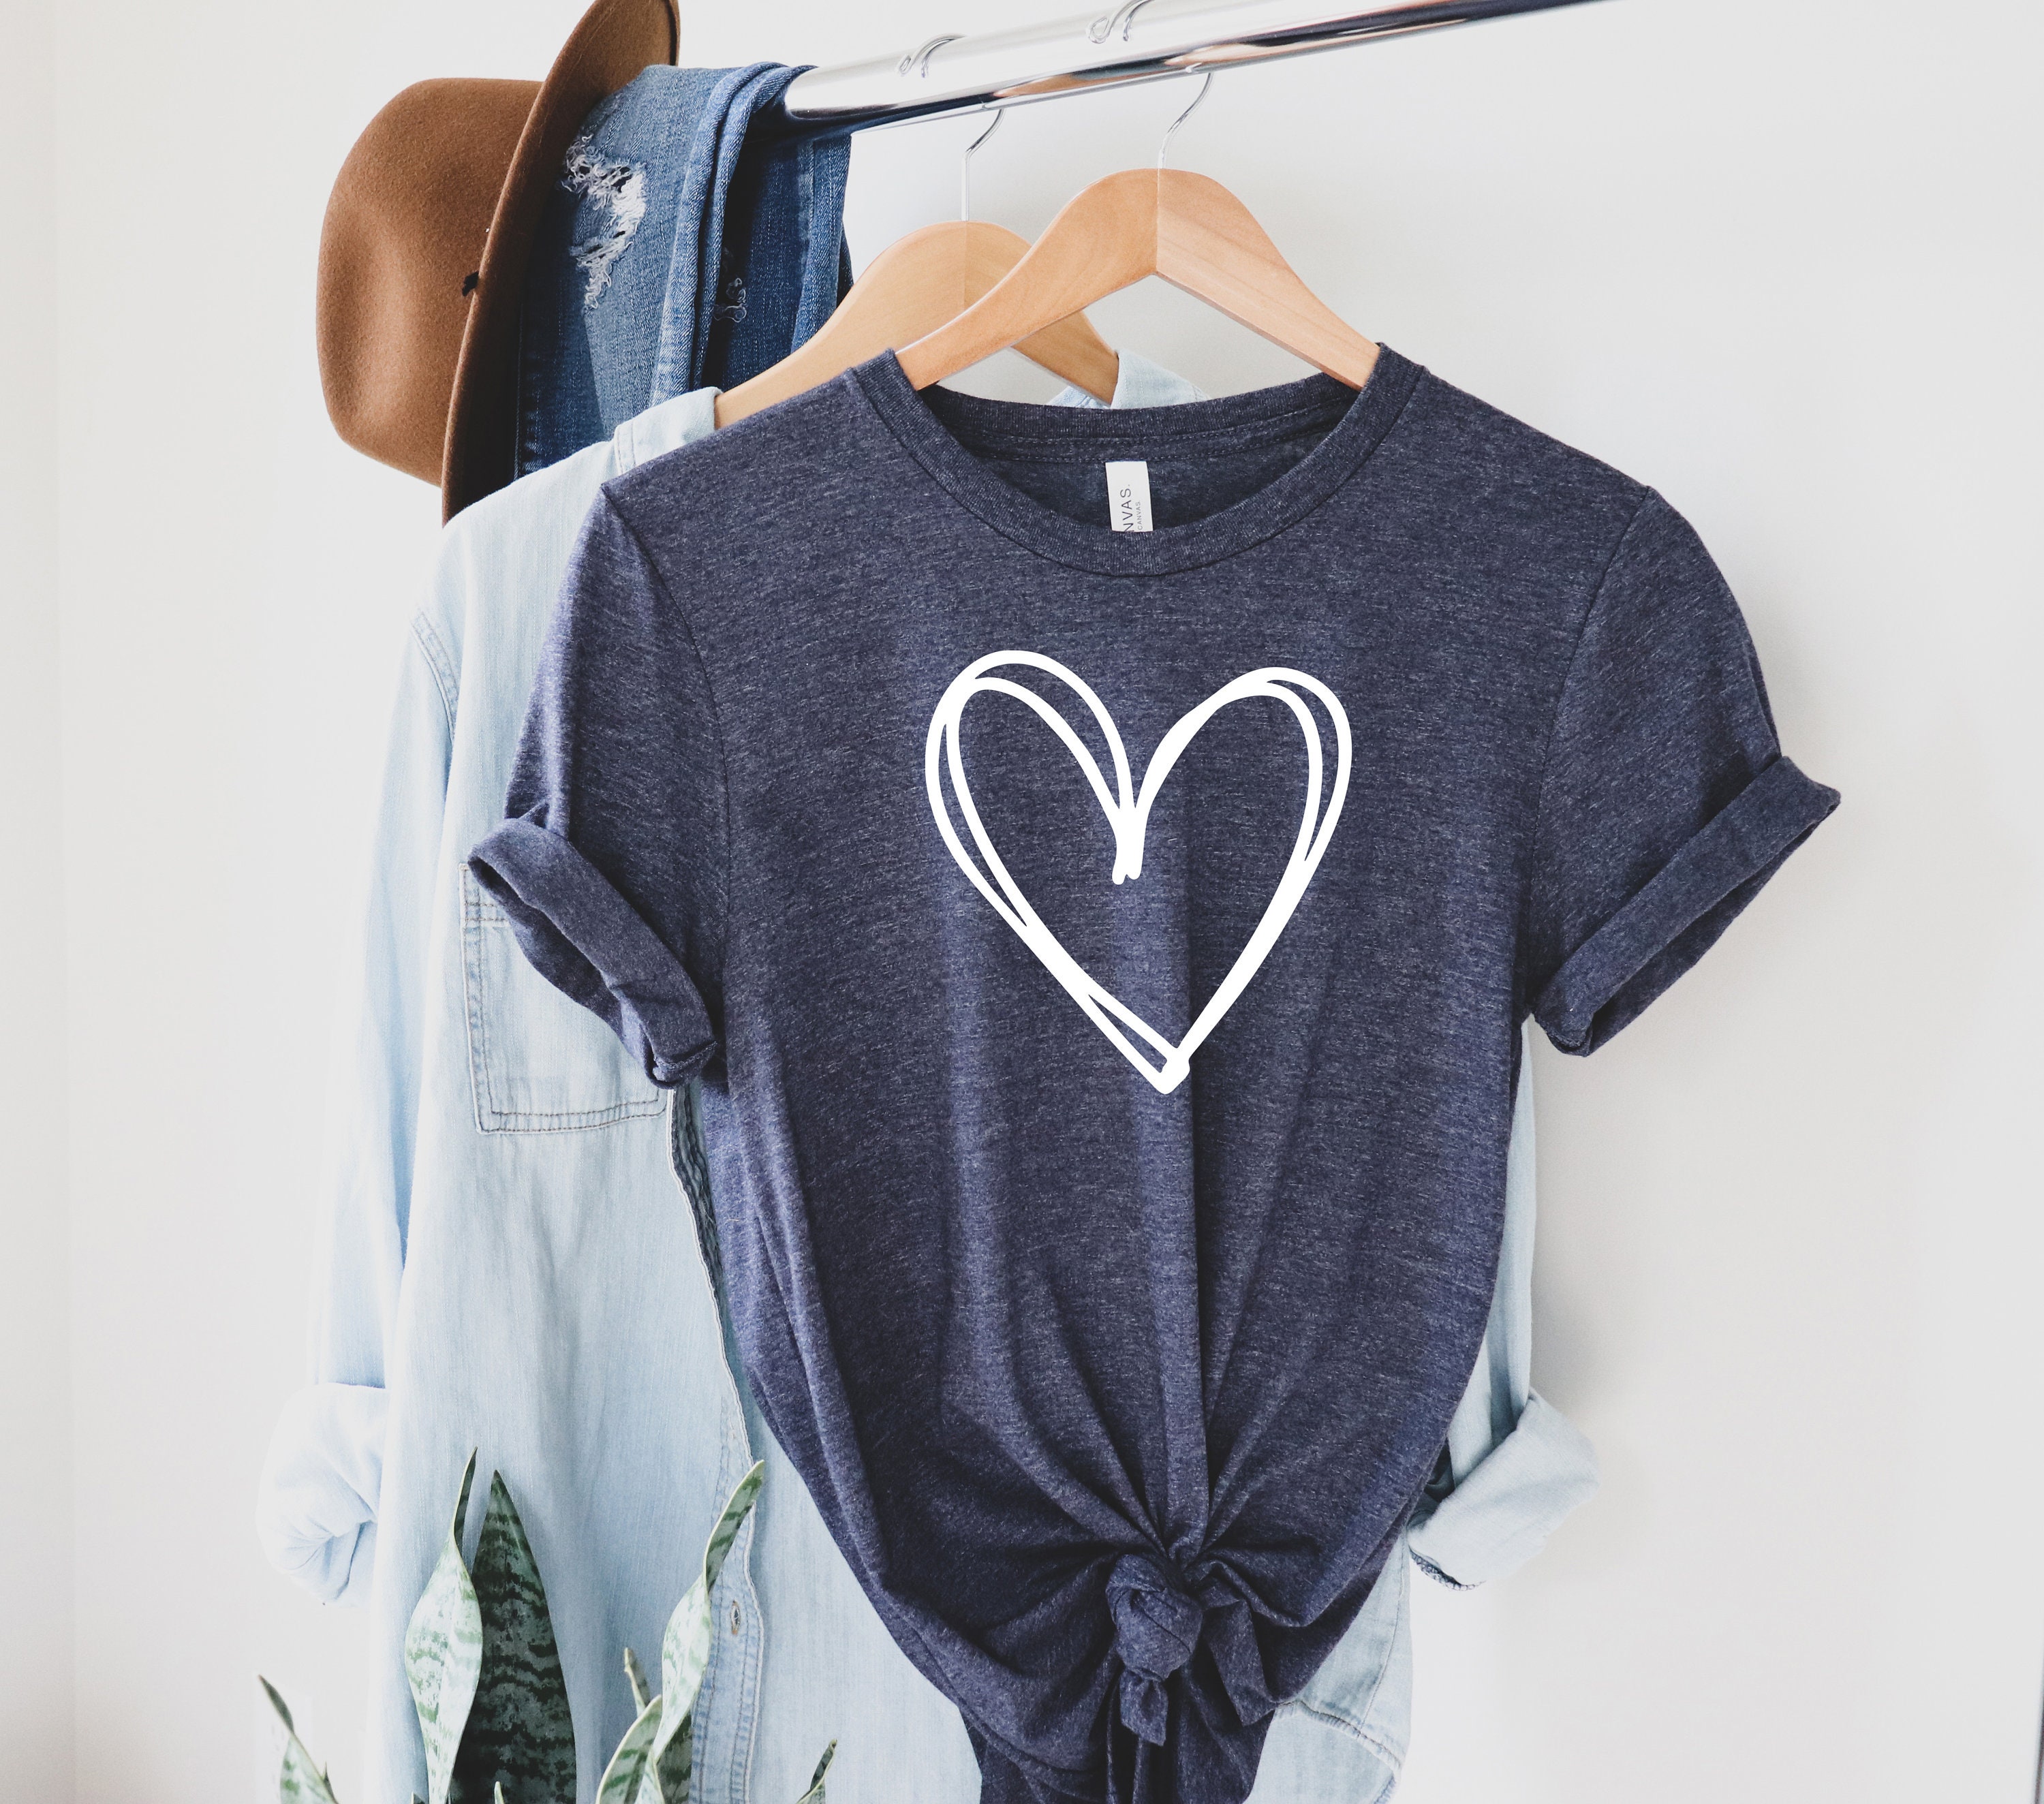 Discover Heart Shirt, Valentines Day Gift, Hand Drawn Heart T-Shirt